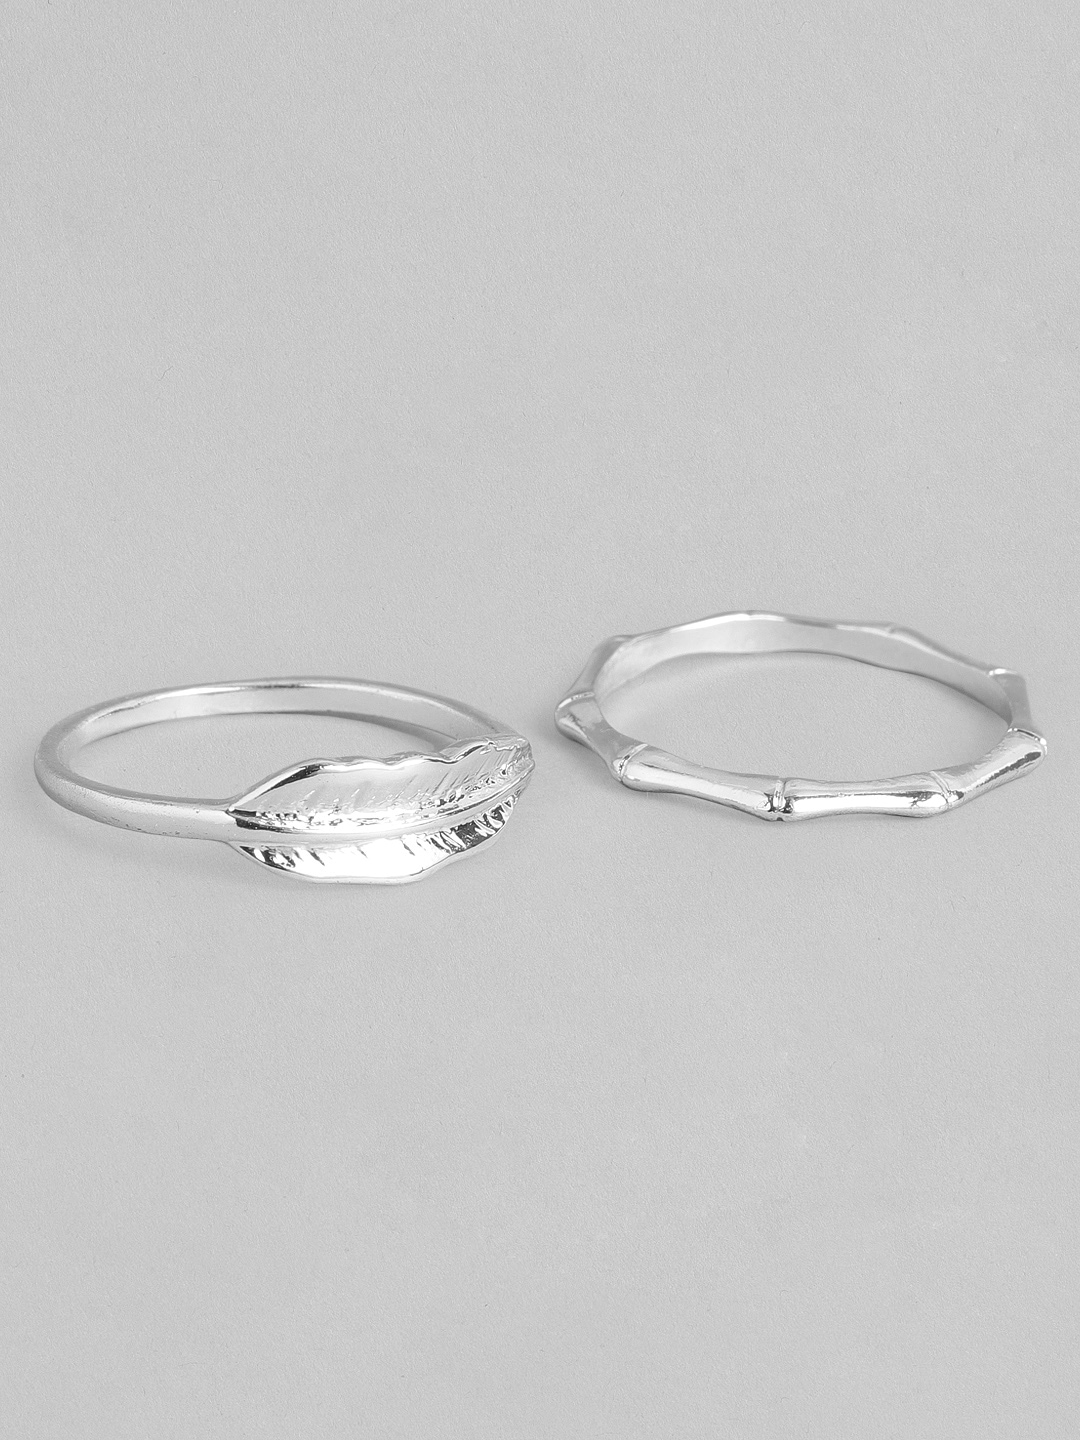 Accessorize Women Set Of 2 Silver-Toned Leaf And Bamboo Design Finger Rings Price in India